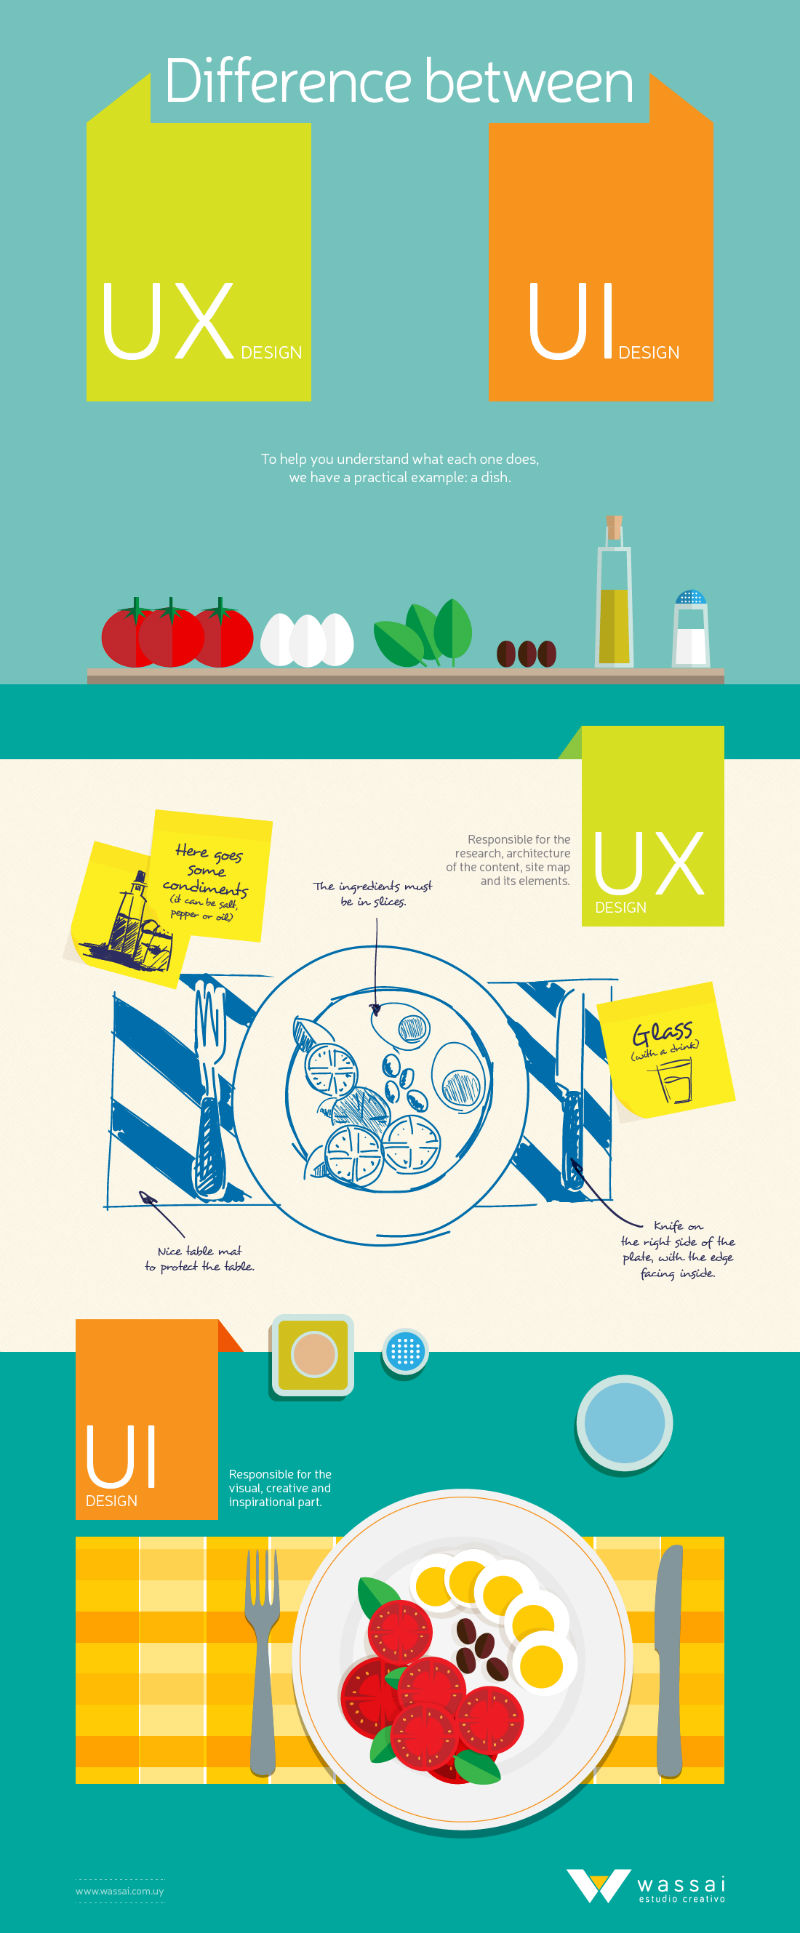 5 Ridiculously Common Misconceptions about UX   SitePoint